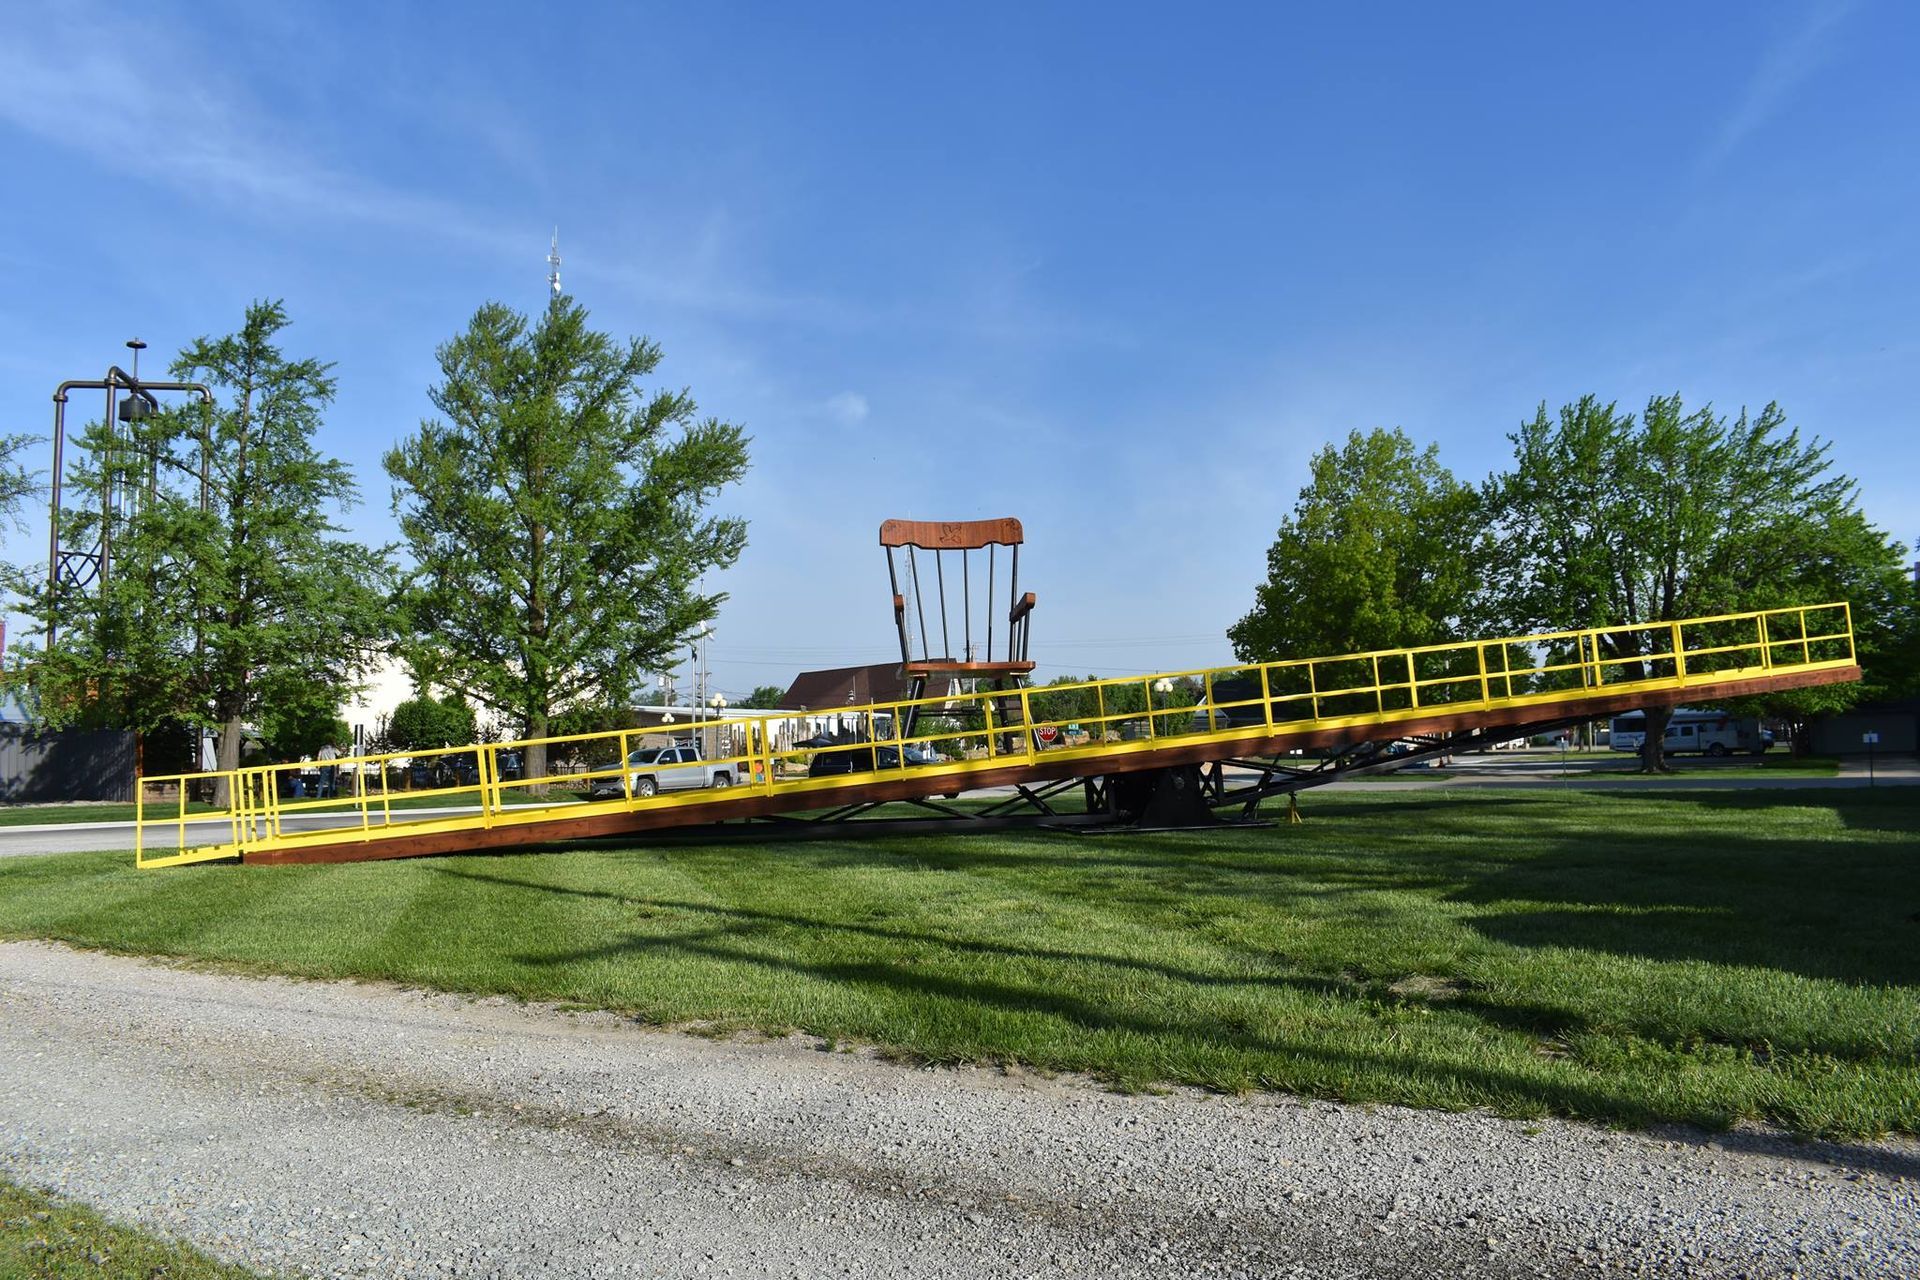 World's Largest Teeter Totter (Seesaw), world record in Casey, Illinois